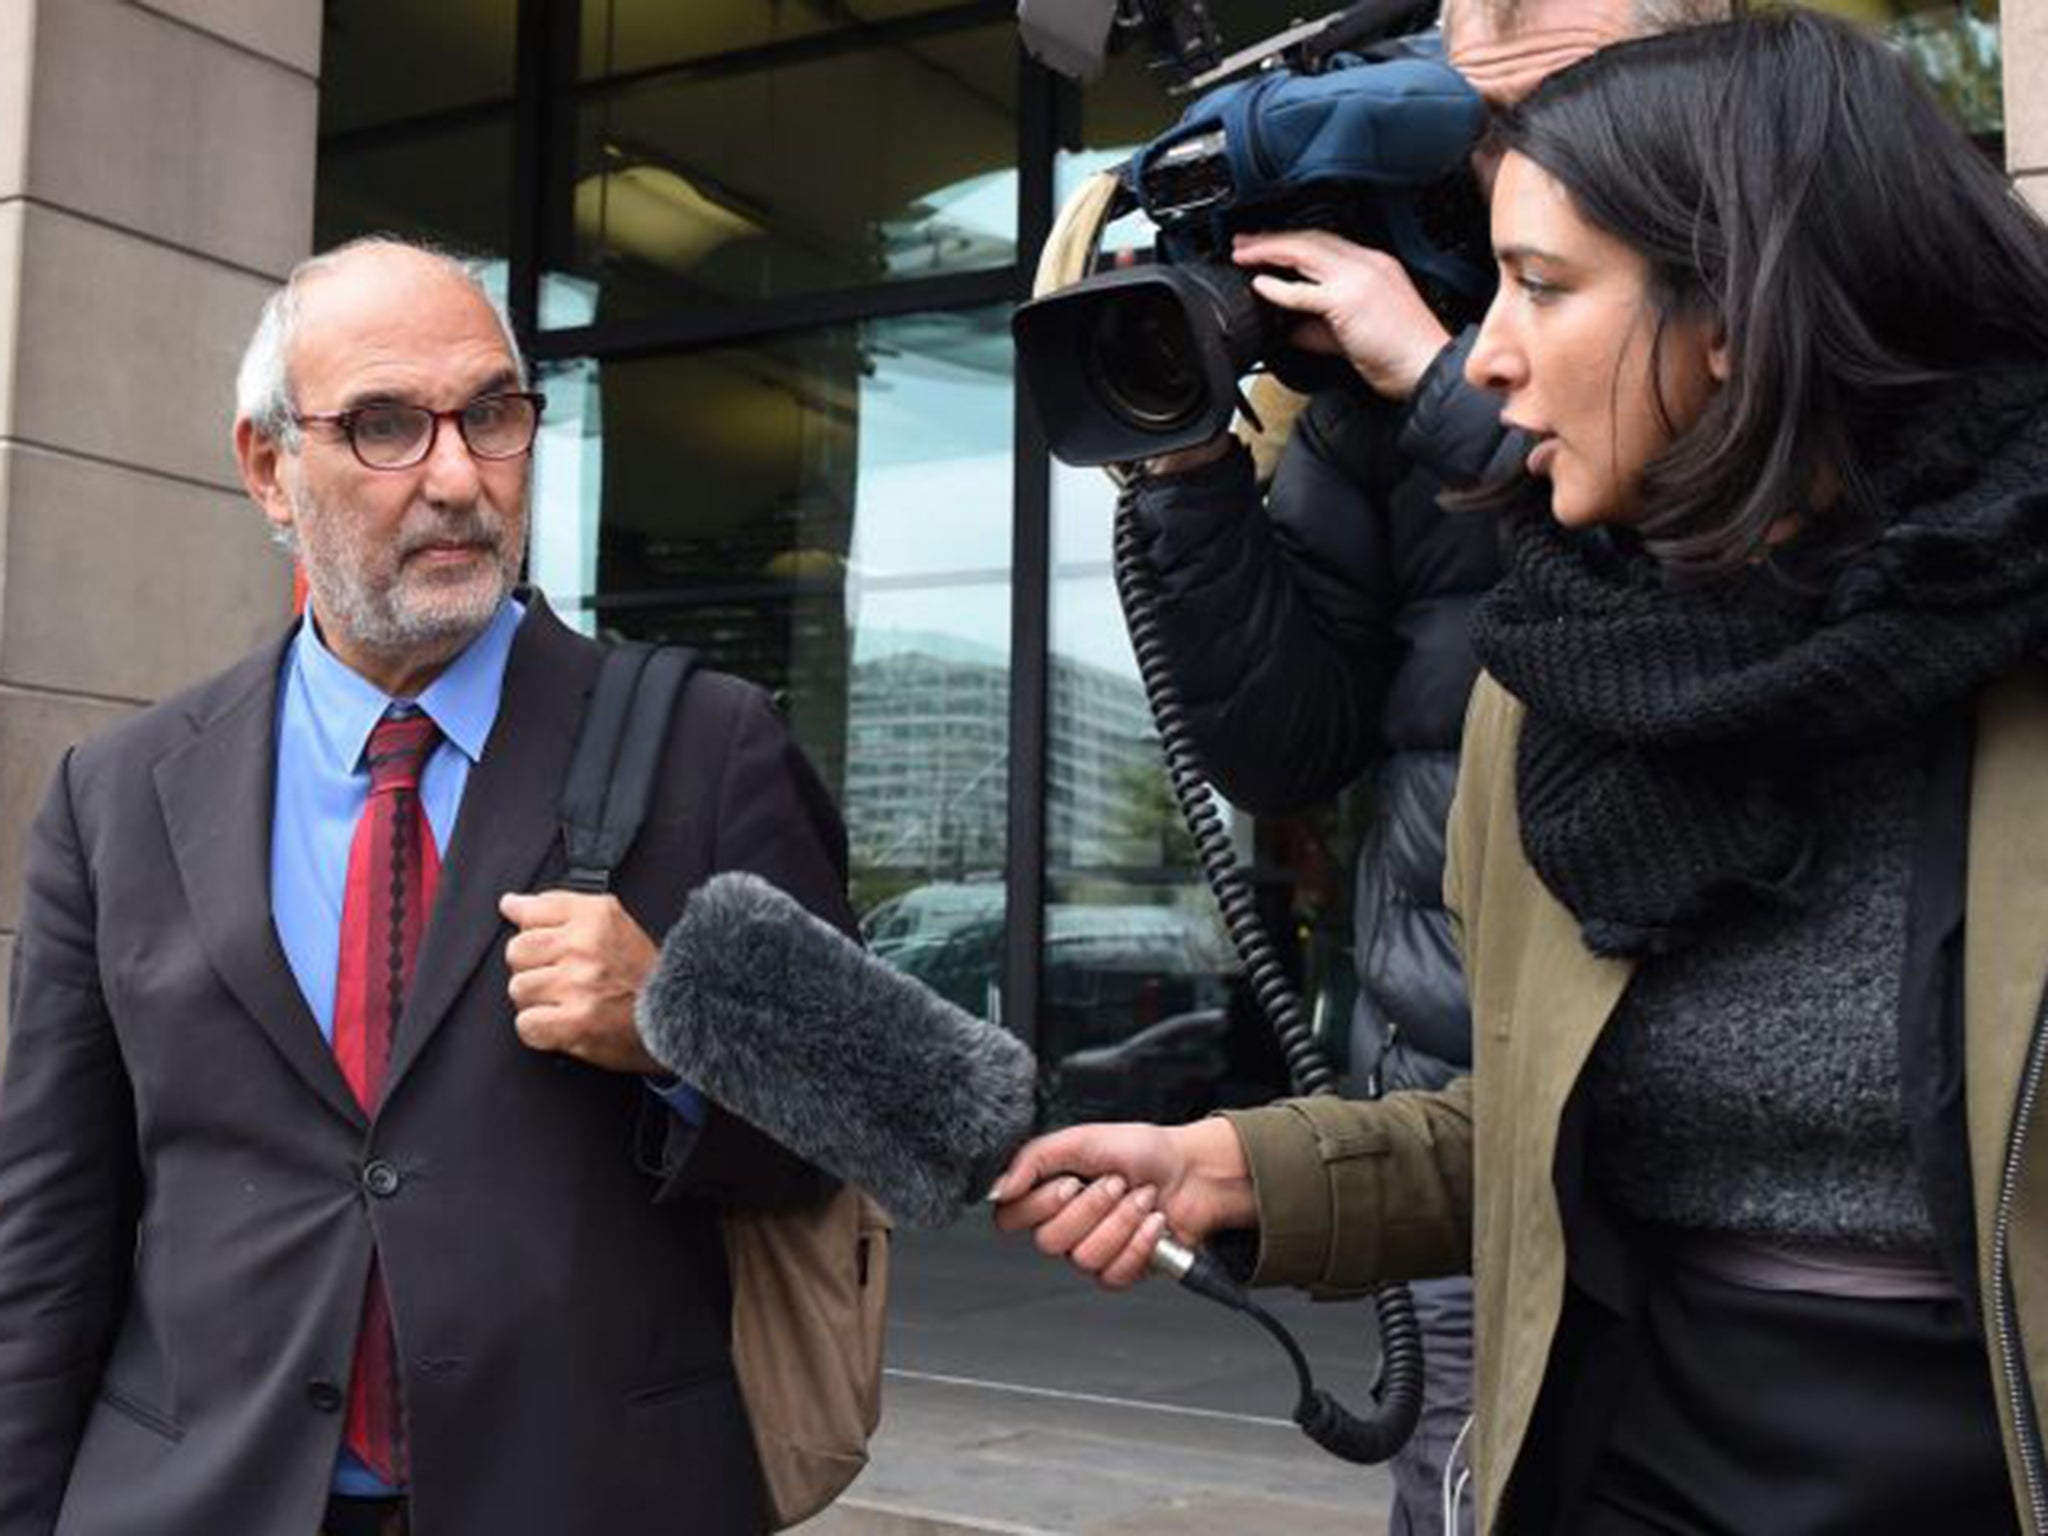 &#13;
Alan Yentob told MPs he regretted not restructuring Kids Company sooner &#13;